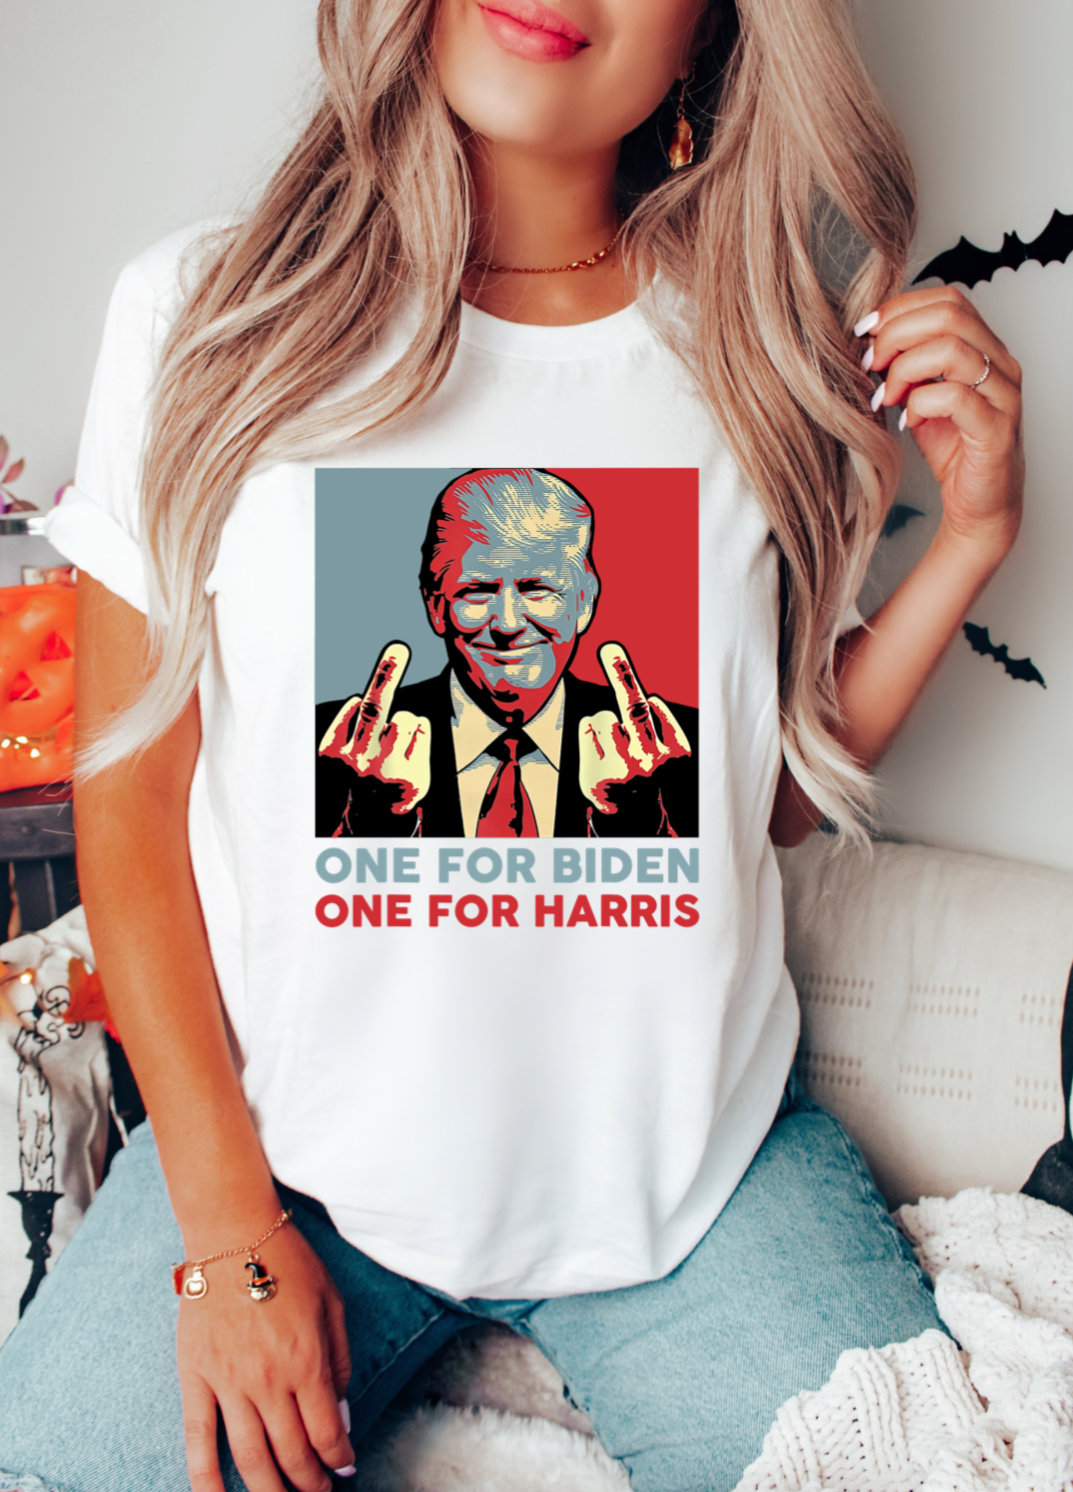 One for Biden one for Harris